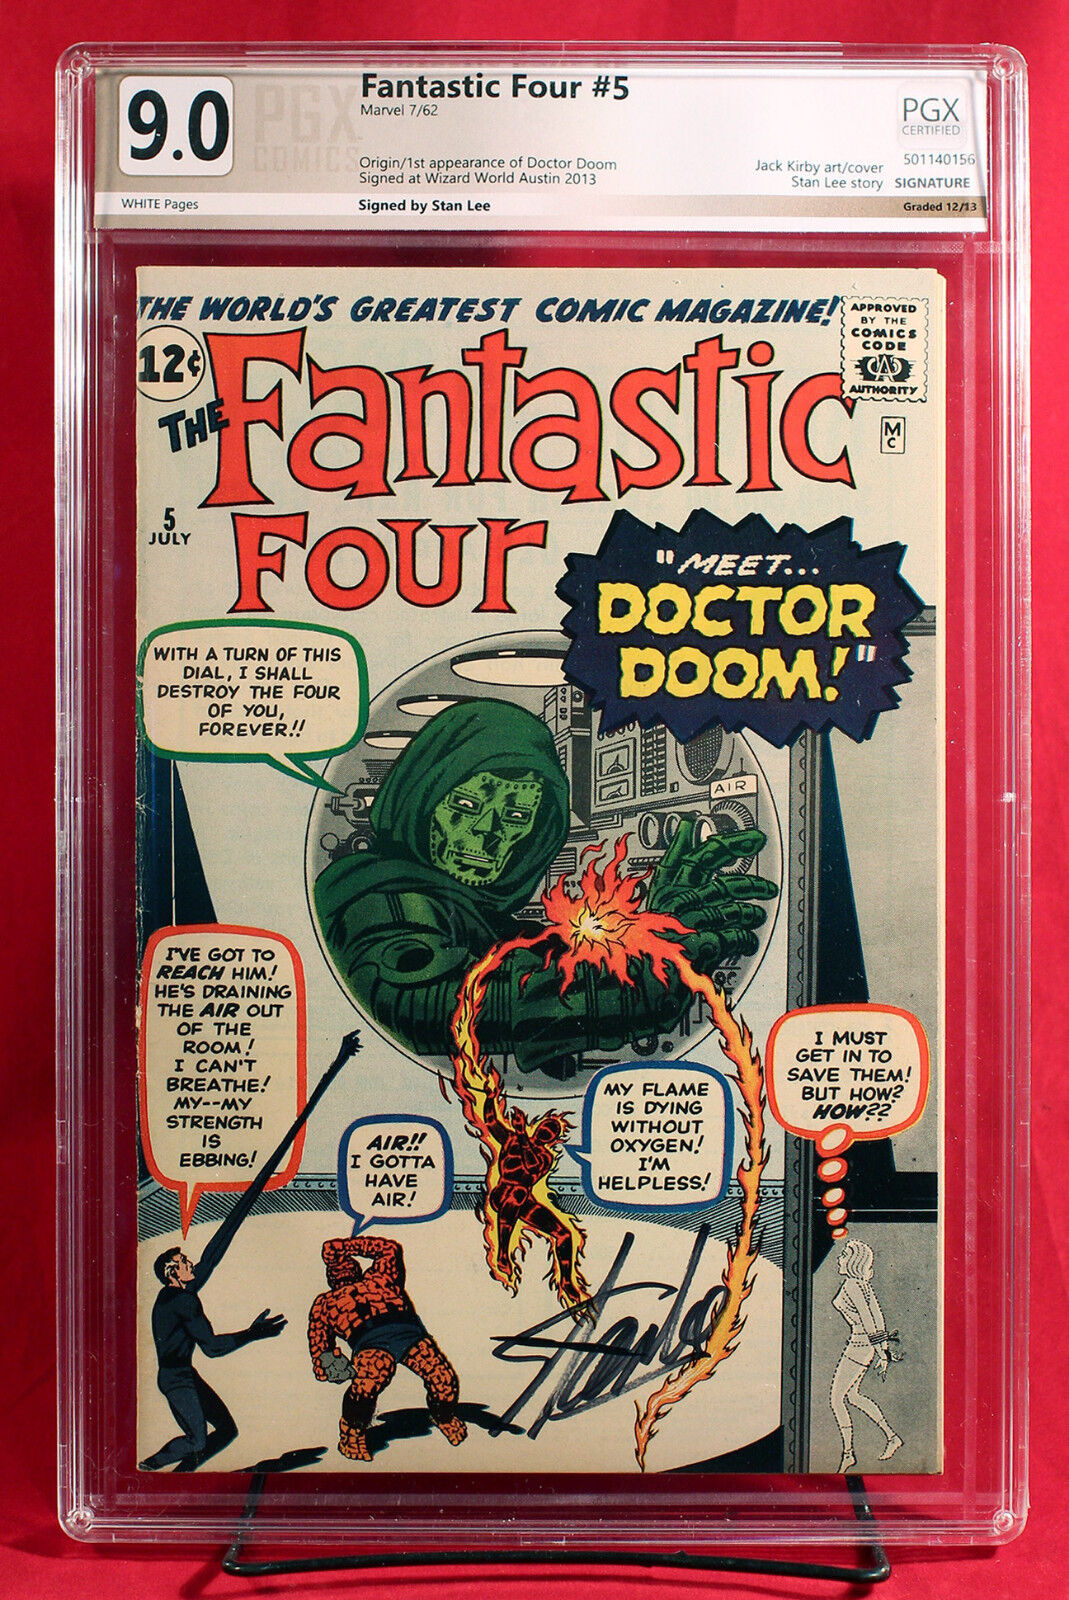 FANTASTIC FOUR #5 (1962) PGX 9.0 VF/NM 1st DOOM signed by writer STAN LEE +CGC